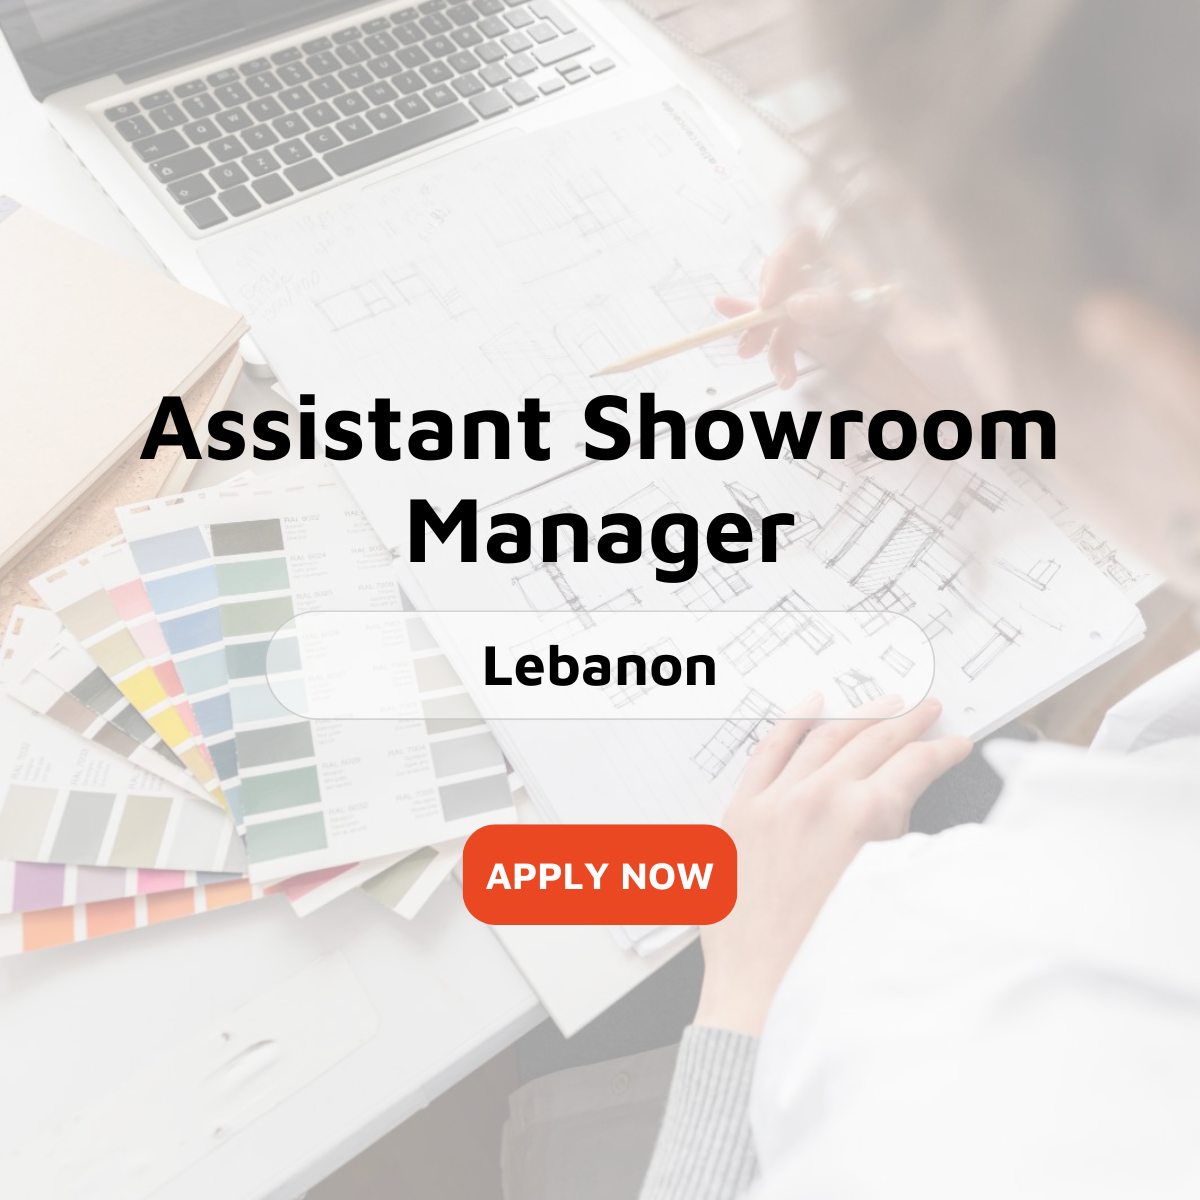 Assistant Showroom Manager